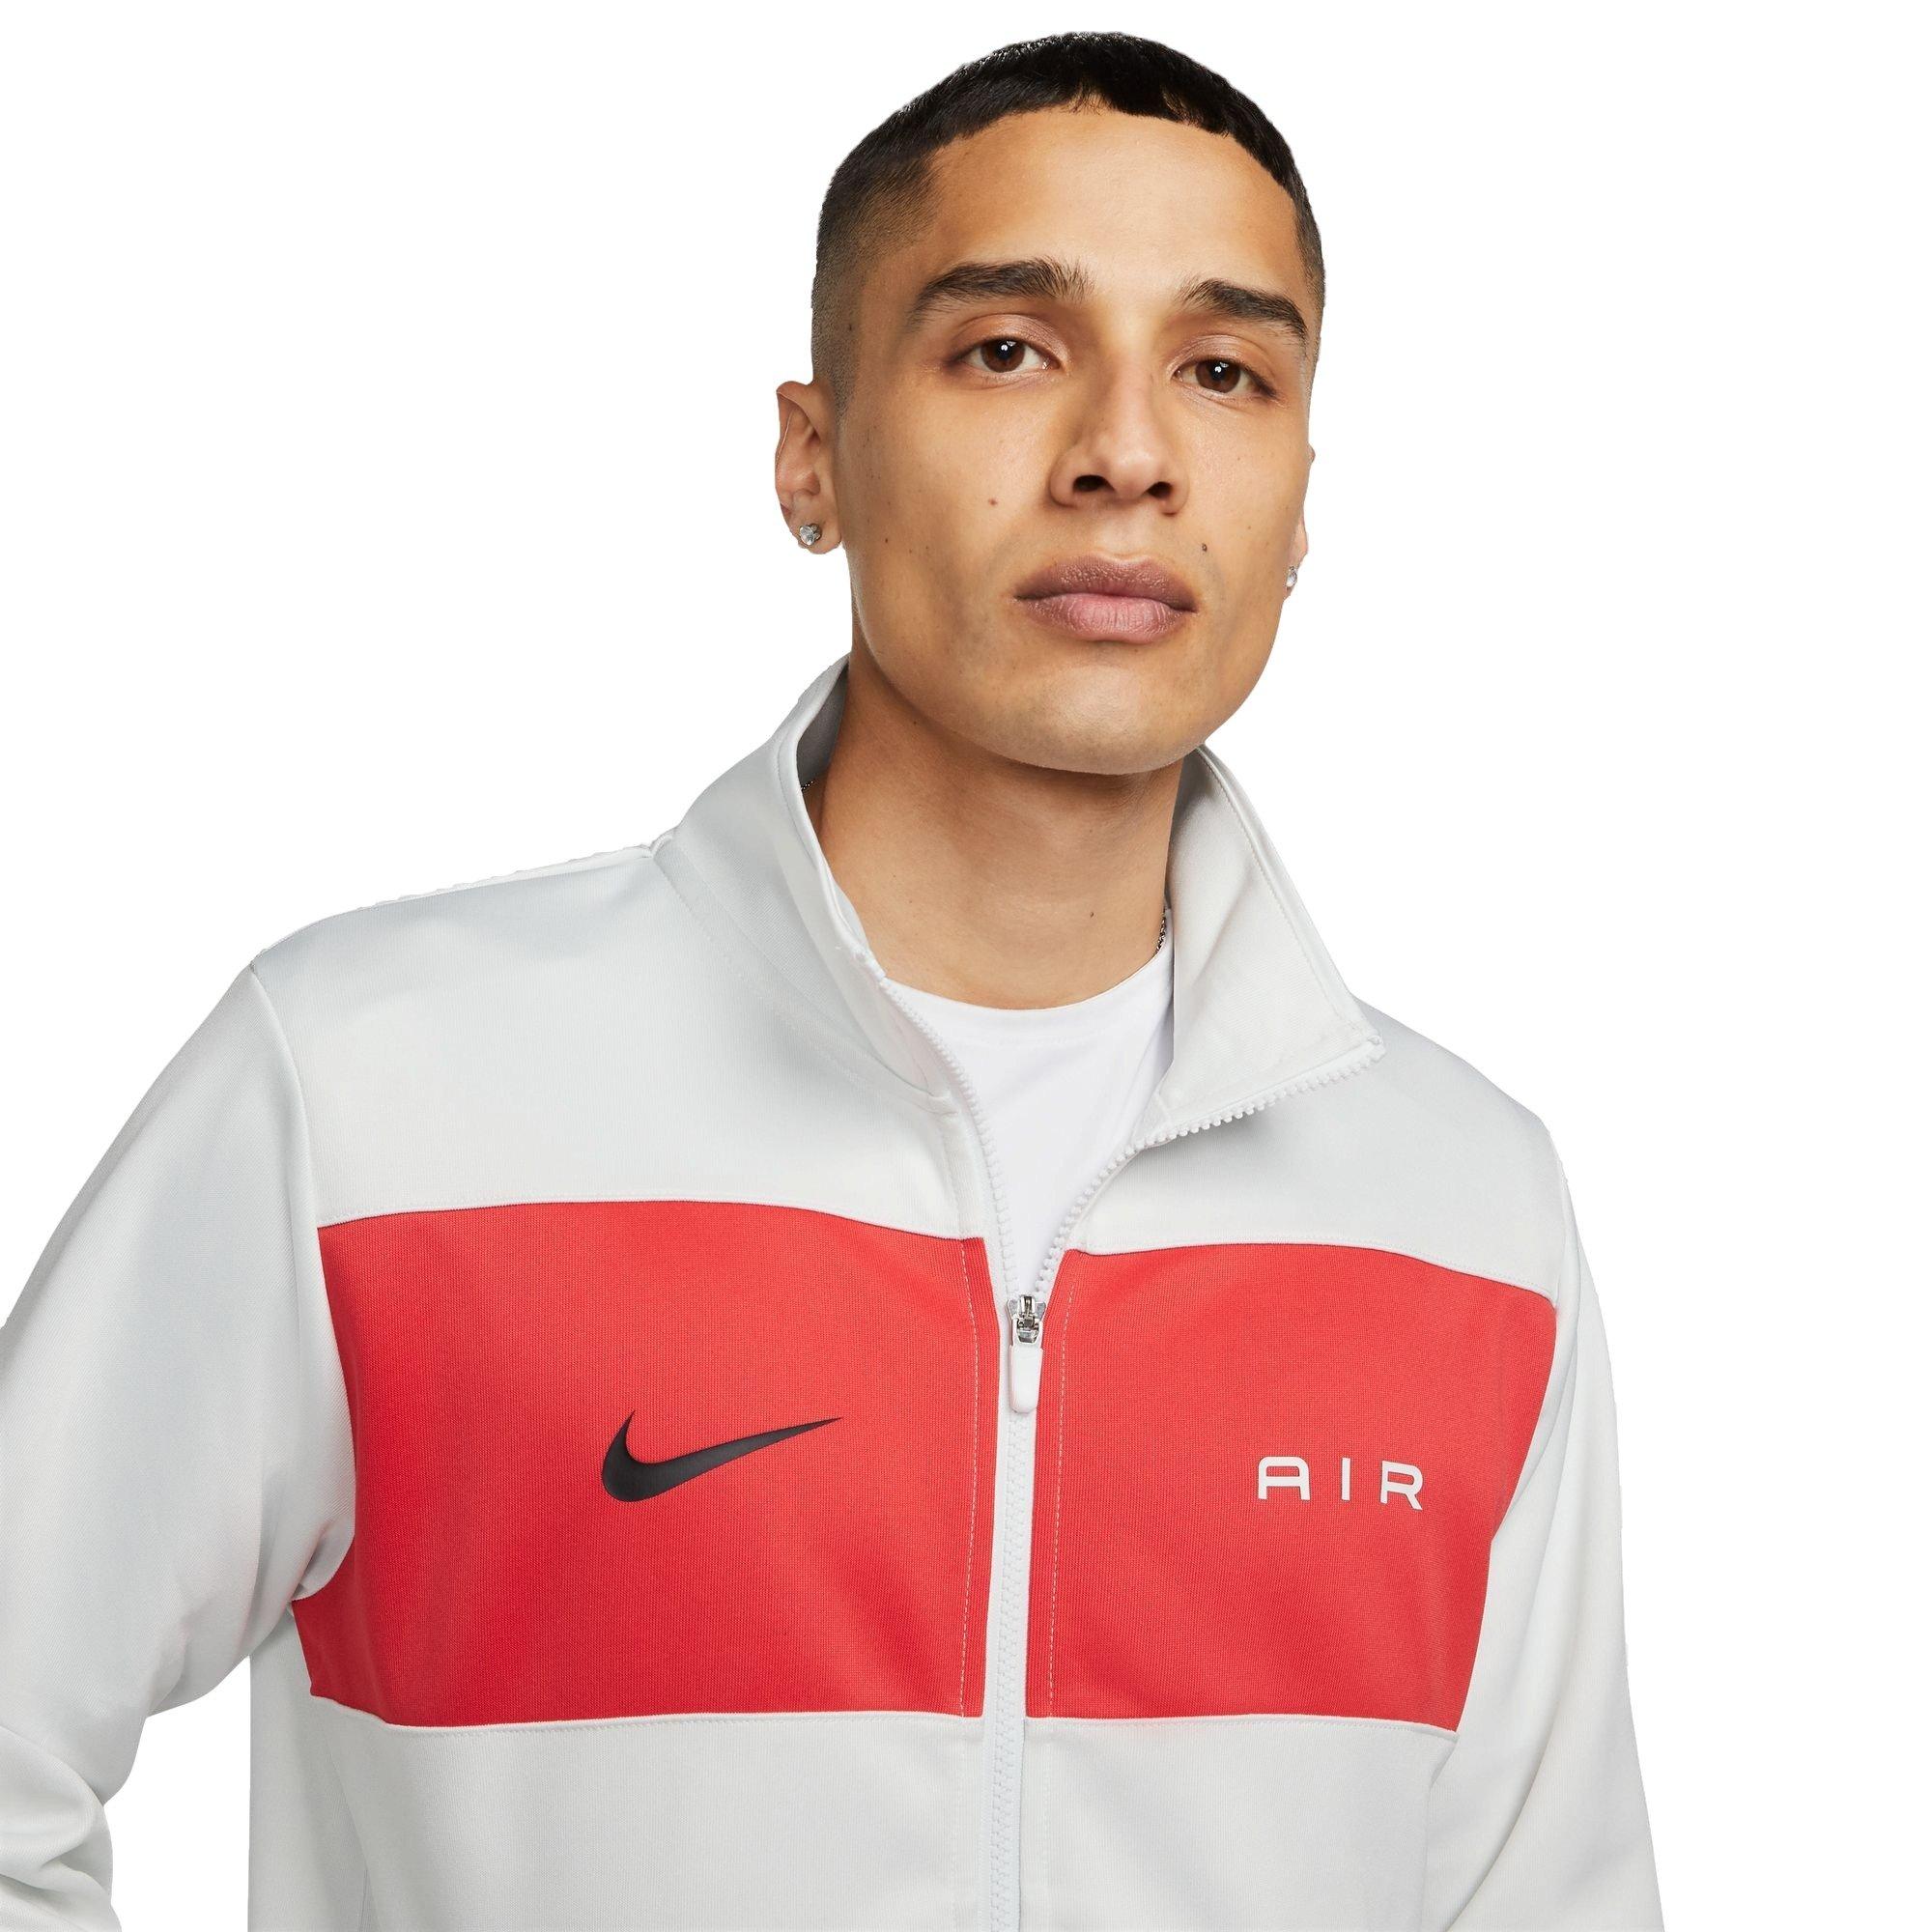 Nike Men's Air Track Top - White/Red